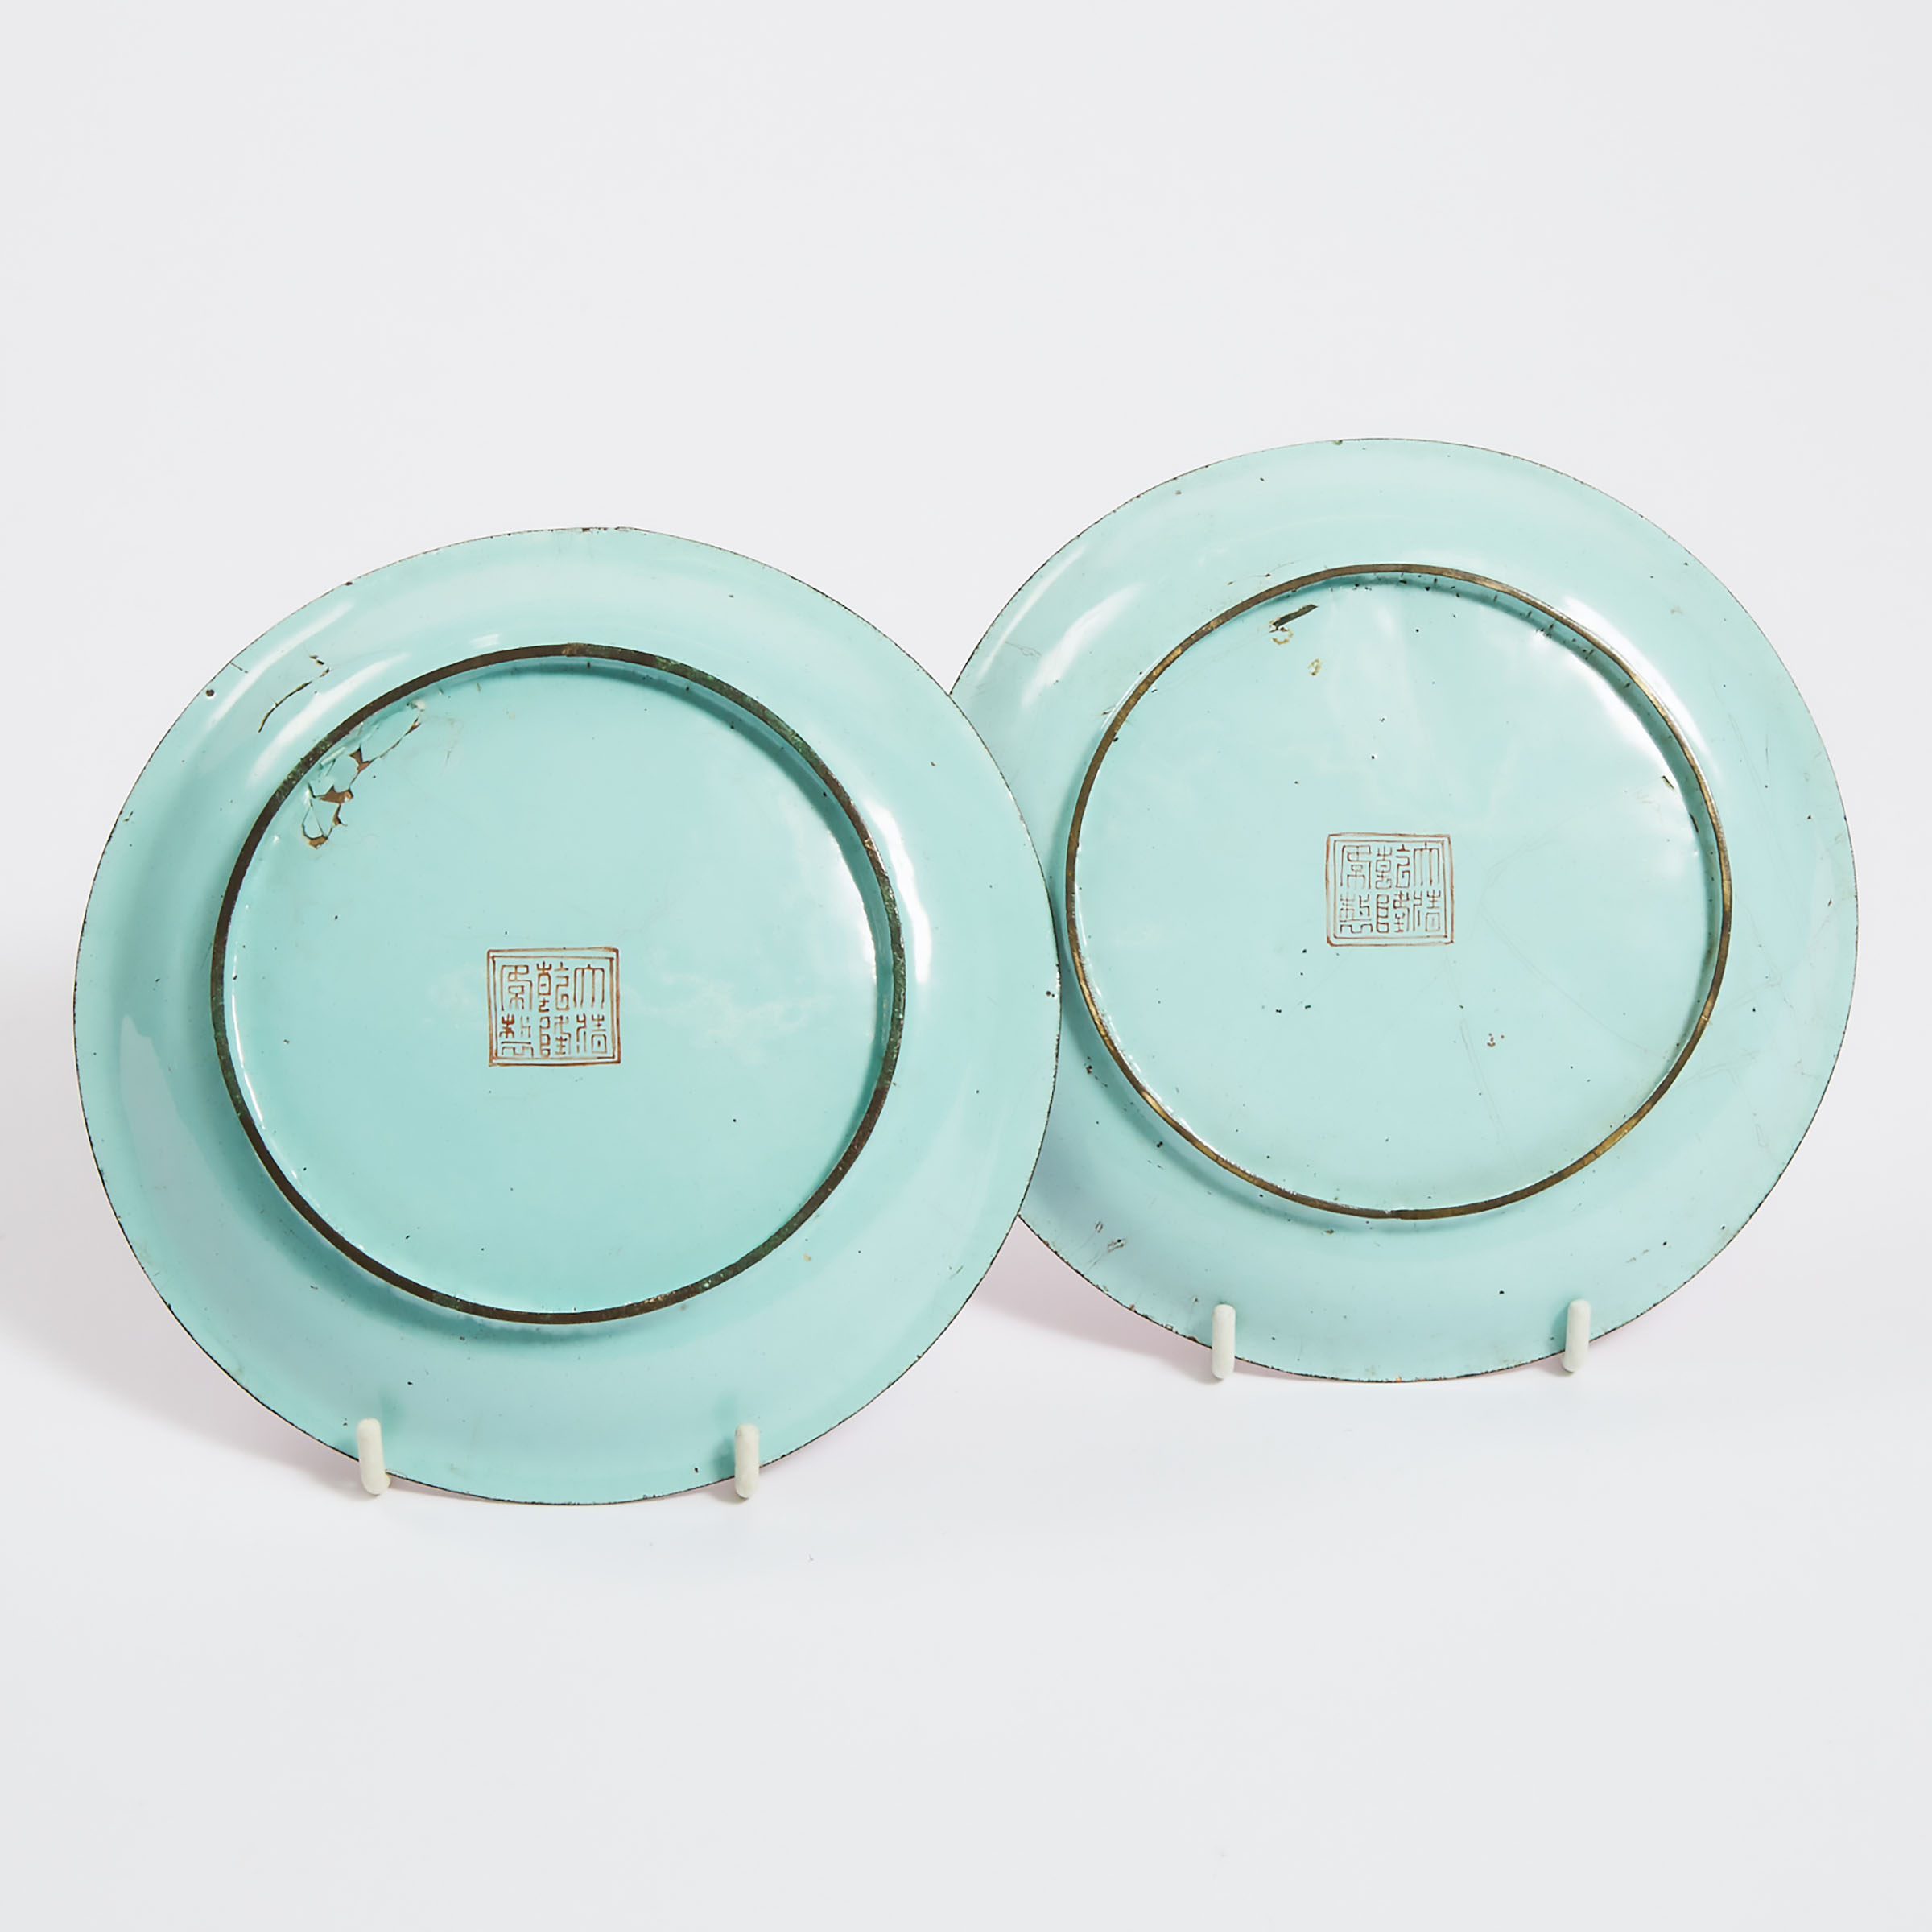 A Pair of Painted Enamel Pink-Ground Dishes, Qianlong Mark